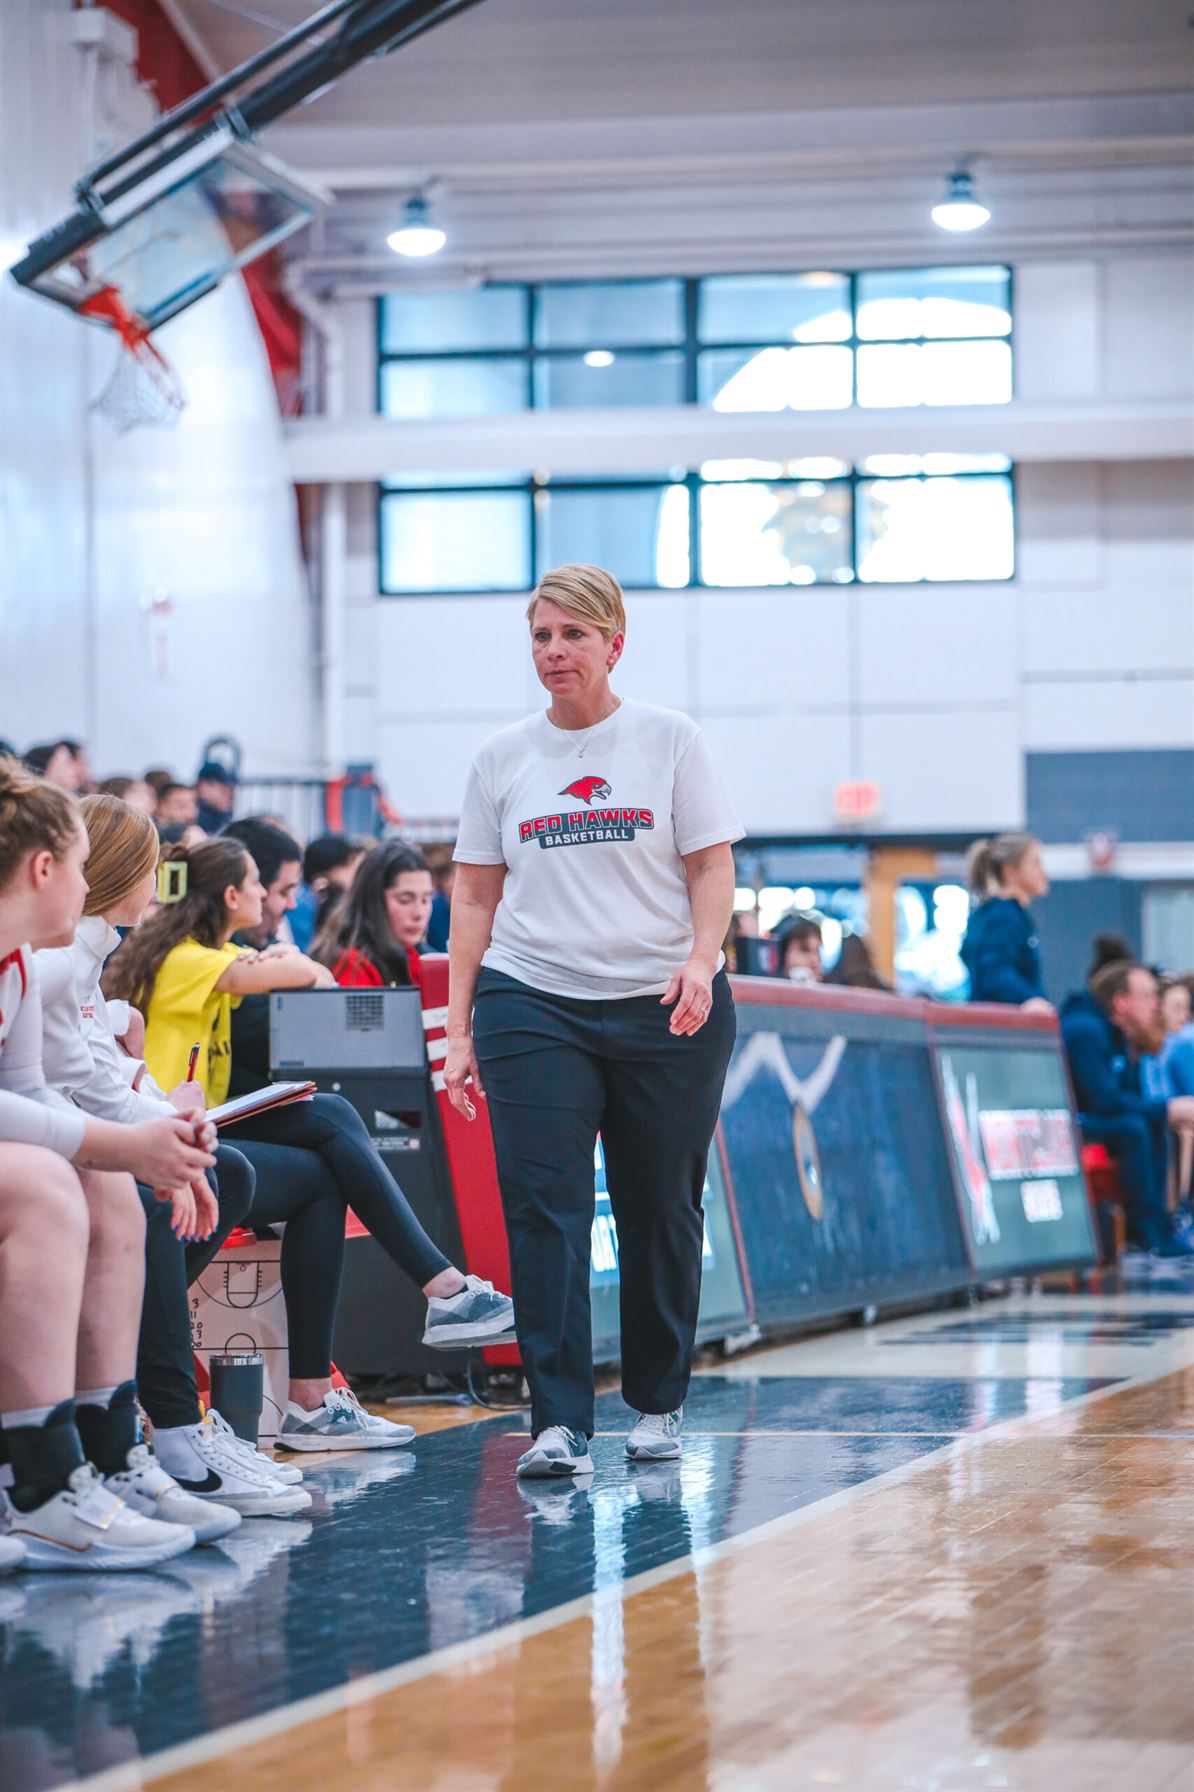 Head coach Karin Harvey has an overall record of 317-113 at Montclair State. Photo courtesy of Markell Robinson